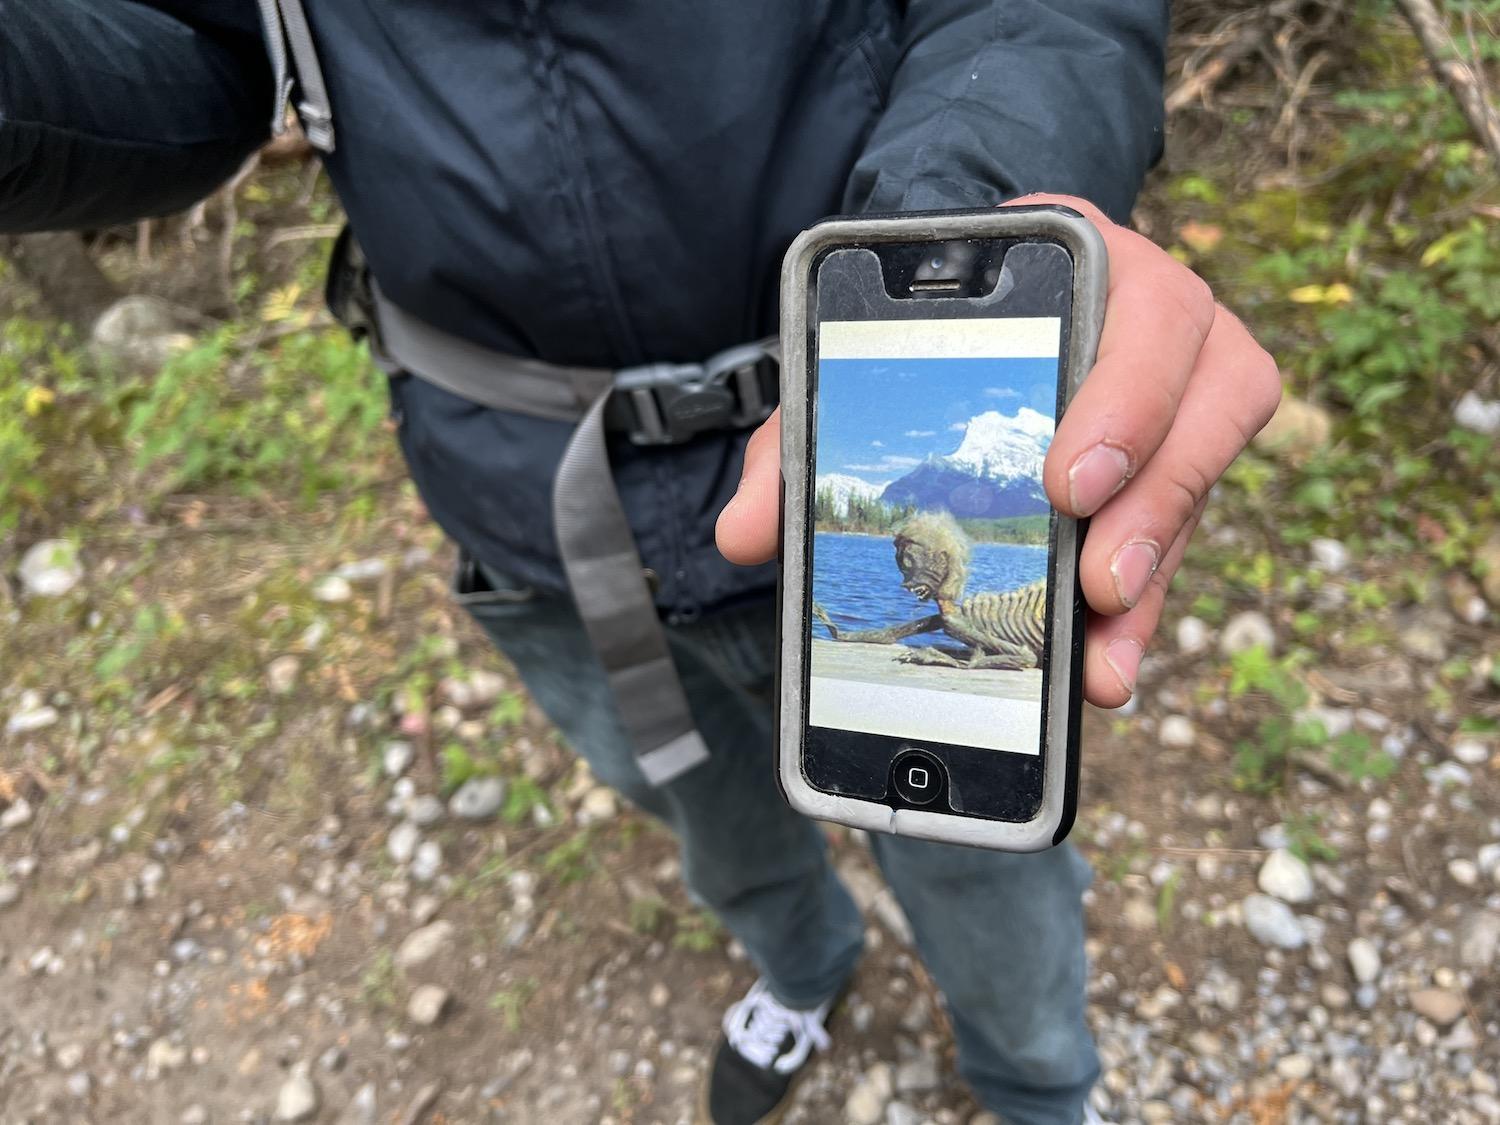 Jordan Ede shows a photo of the "merman," a fabricated monster said to live in Lake Minnewanka.